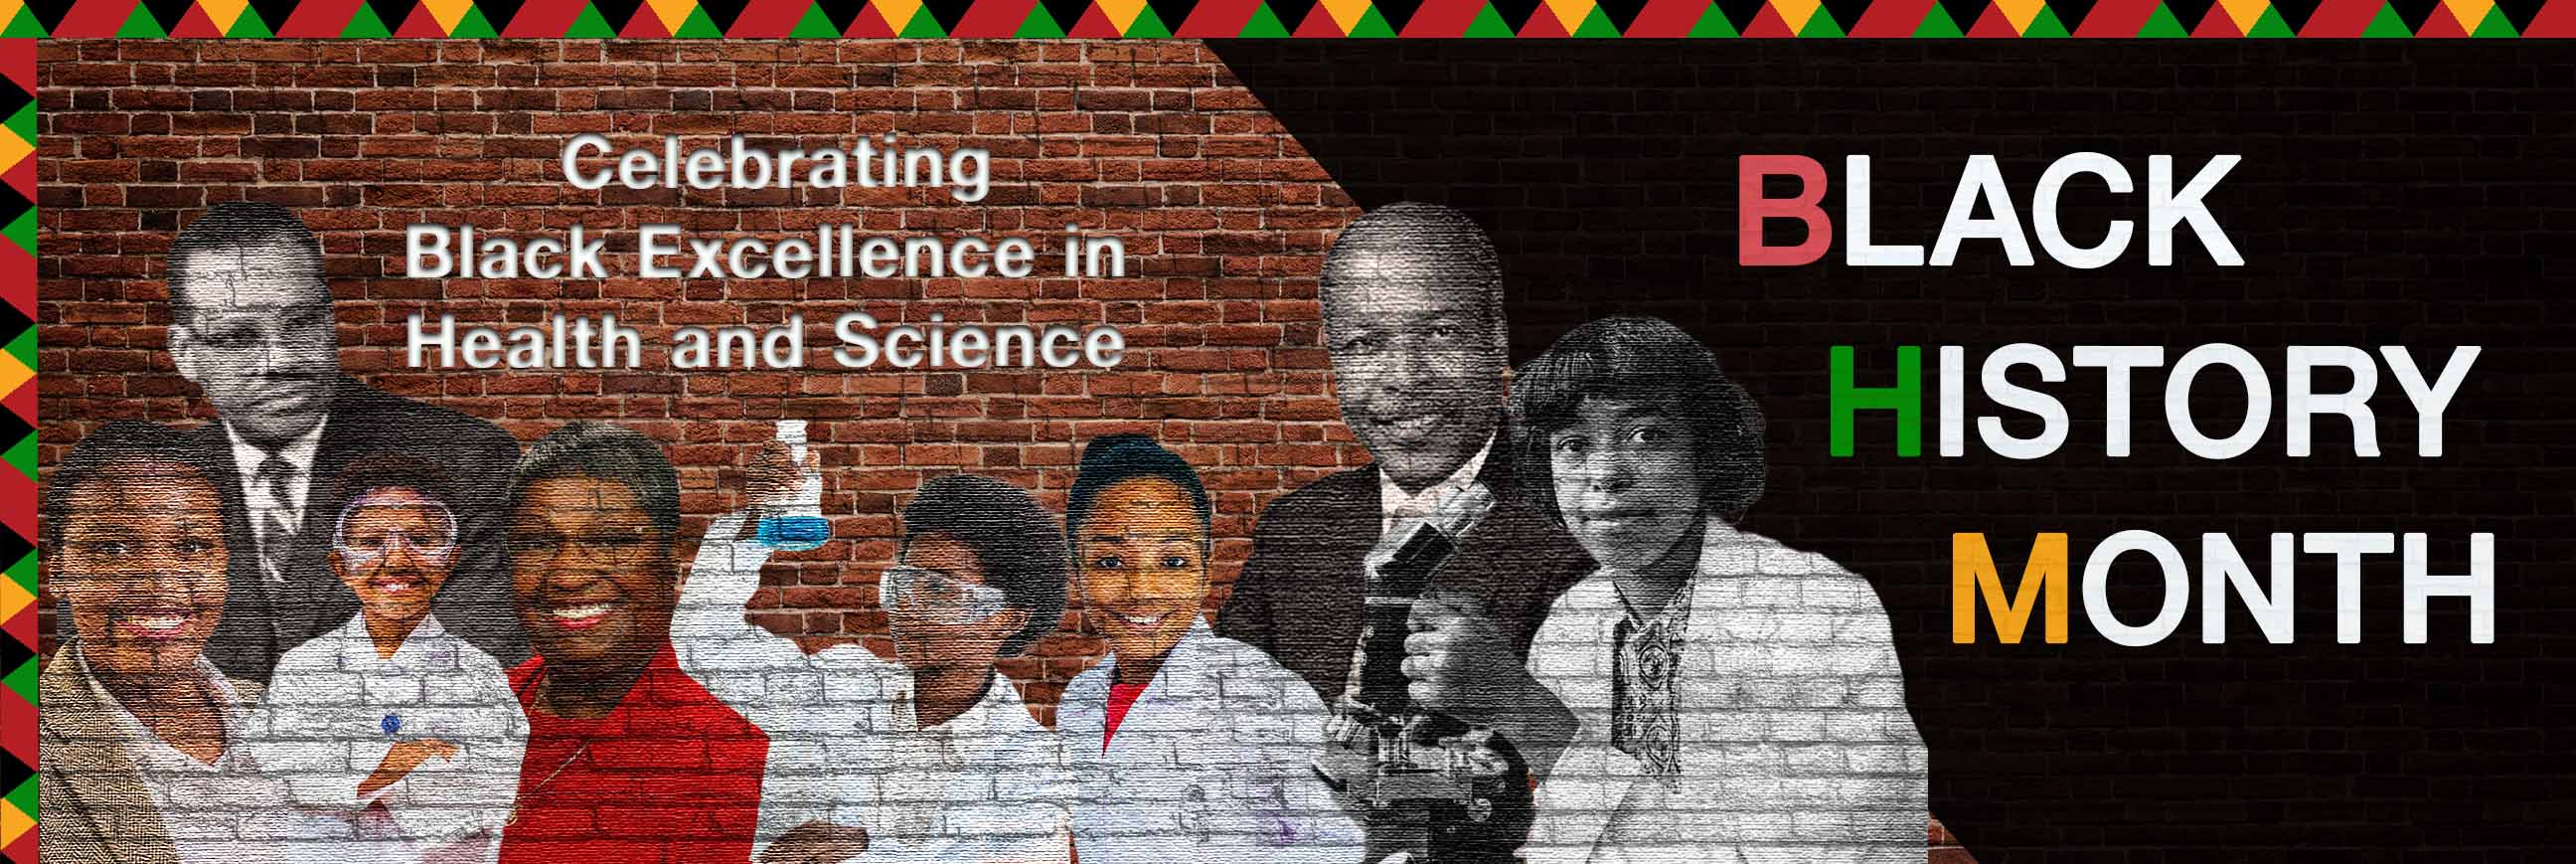 Artwork featuring portraits of innovators in the field of health and science on a brick wall with the words, Celebrating Black Excellence in Health and Science etched into the wall.